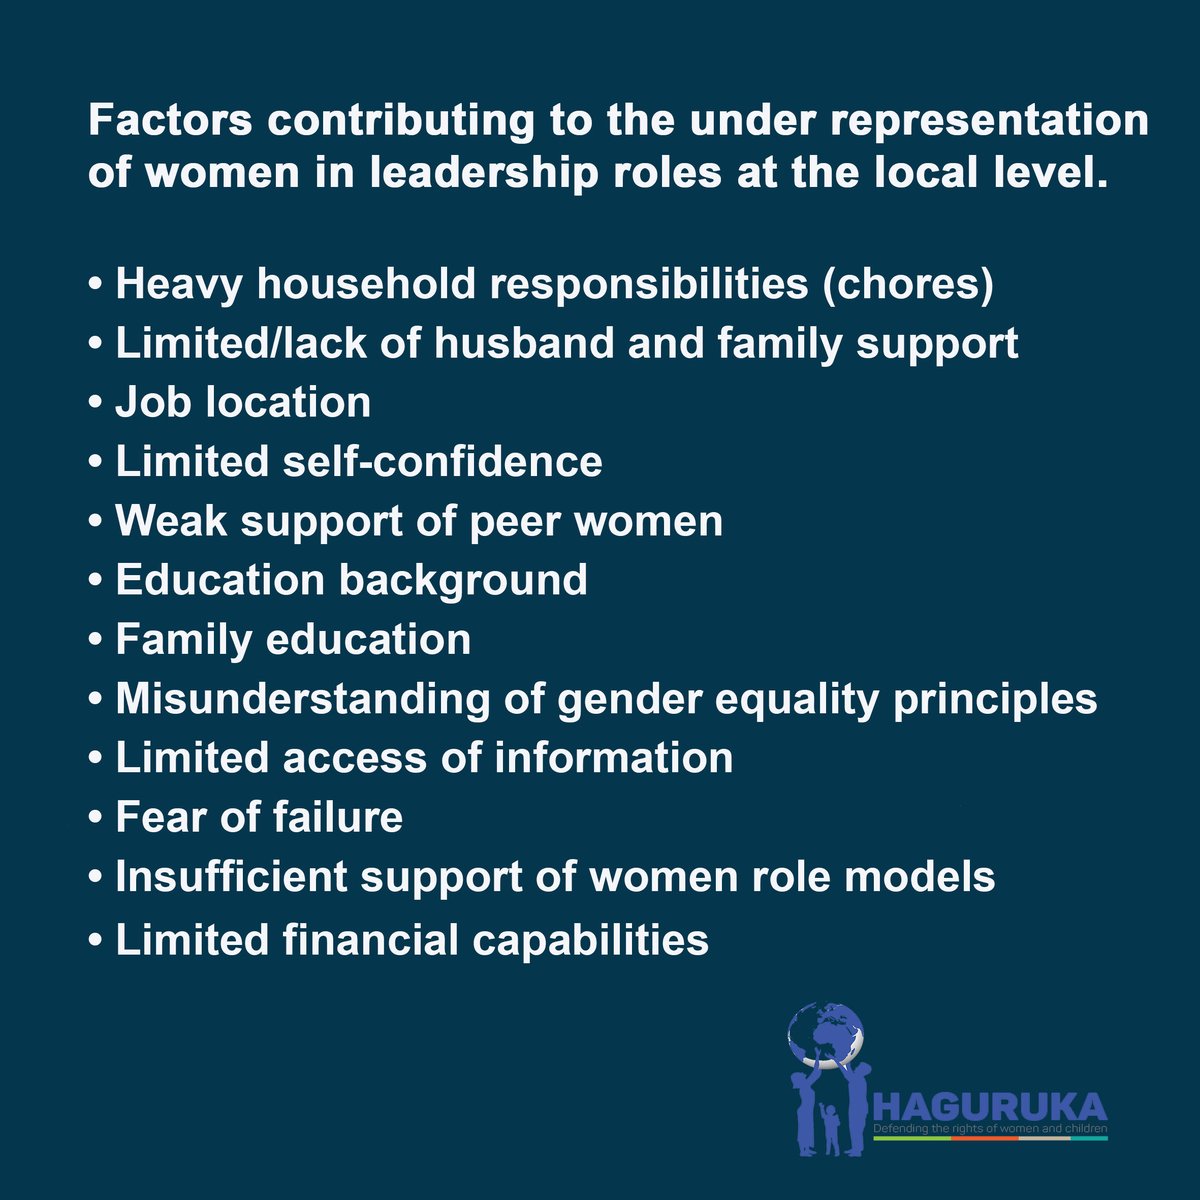 To spark the conversation, key findings from the research conducted by Haguruka & @trocaire on factors leading to under-representation of women in decision-making positions at the local level were shared as follows: 

#WomeninDecisionMaking